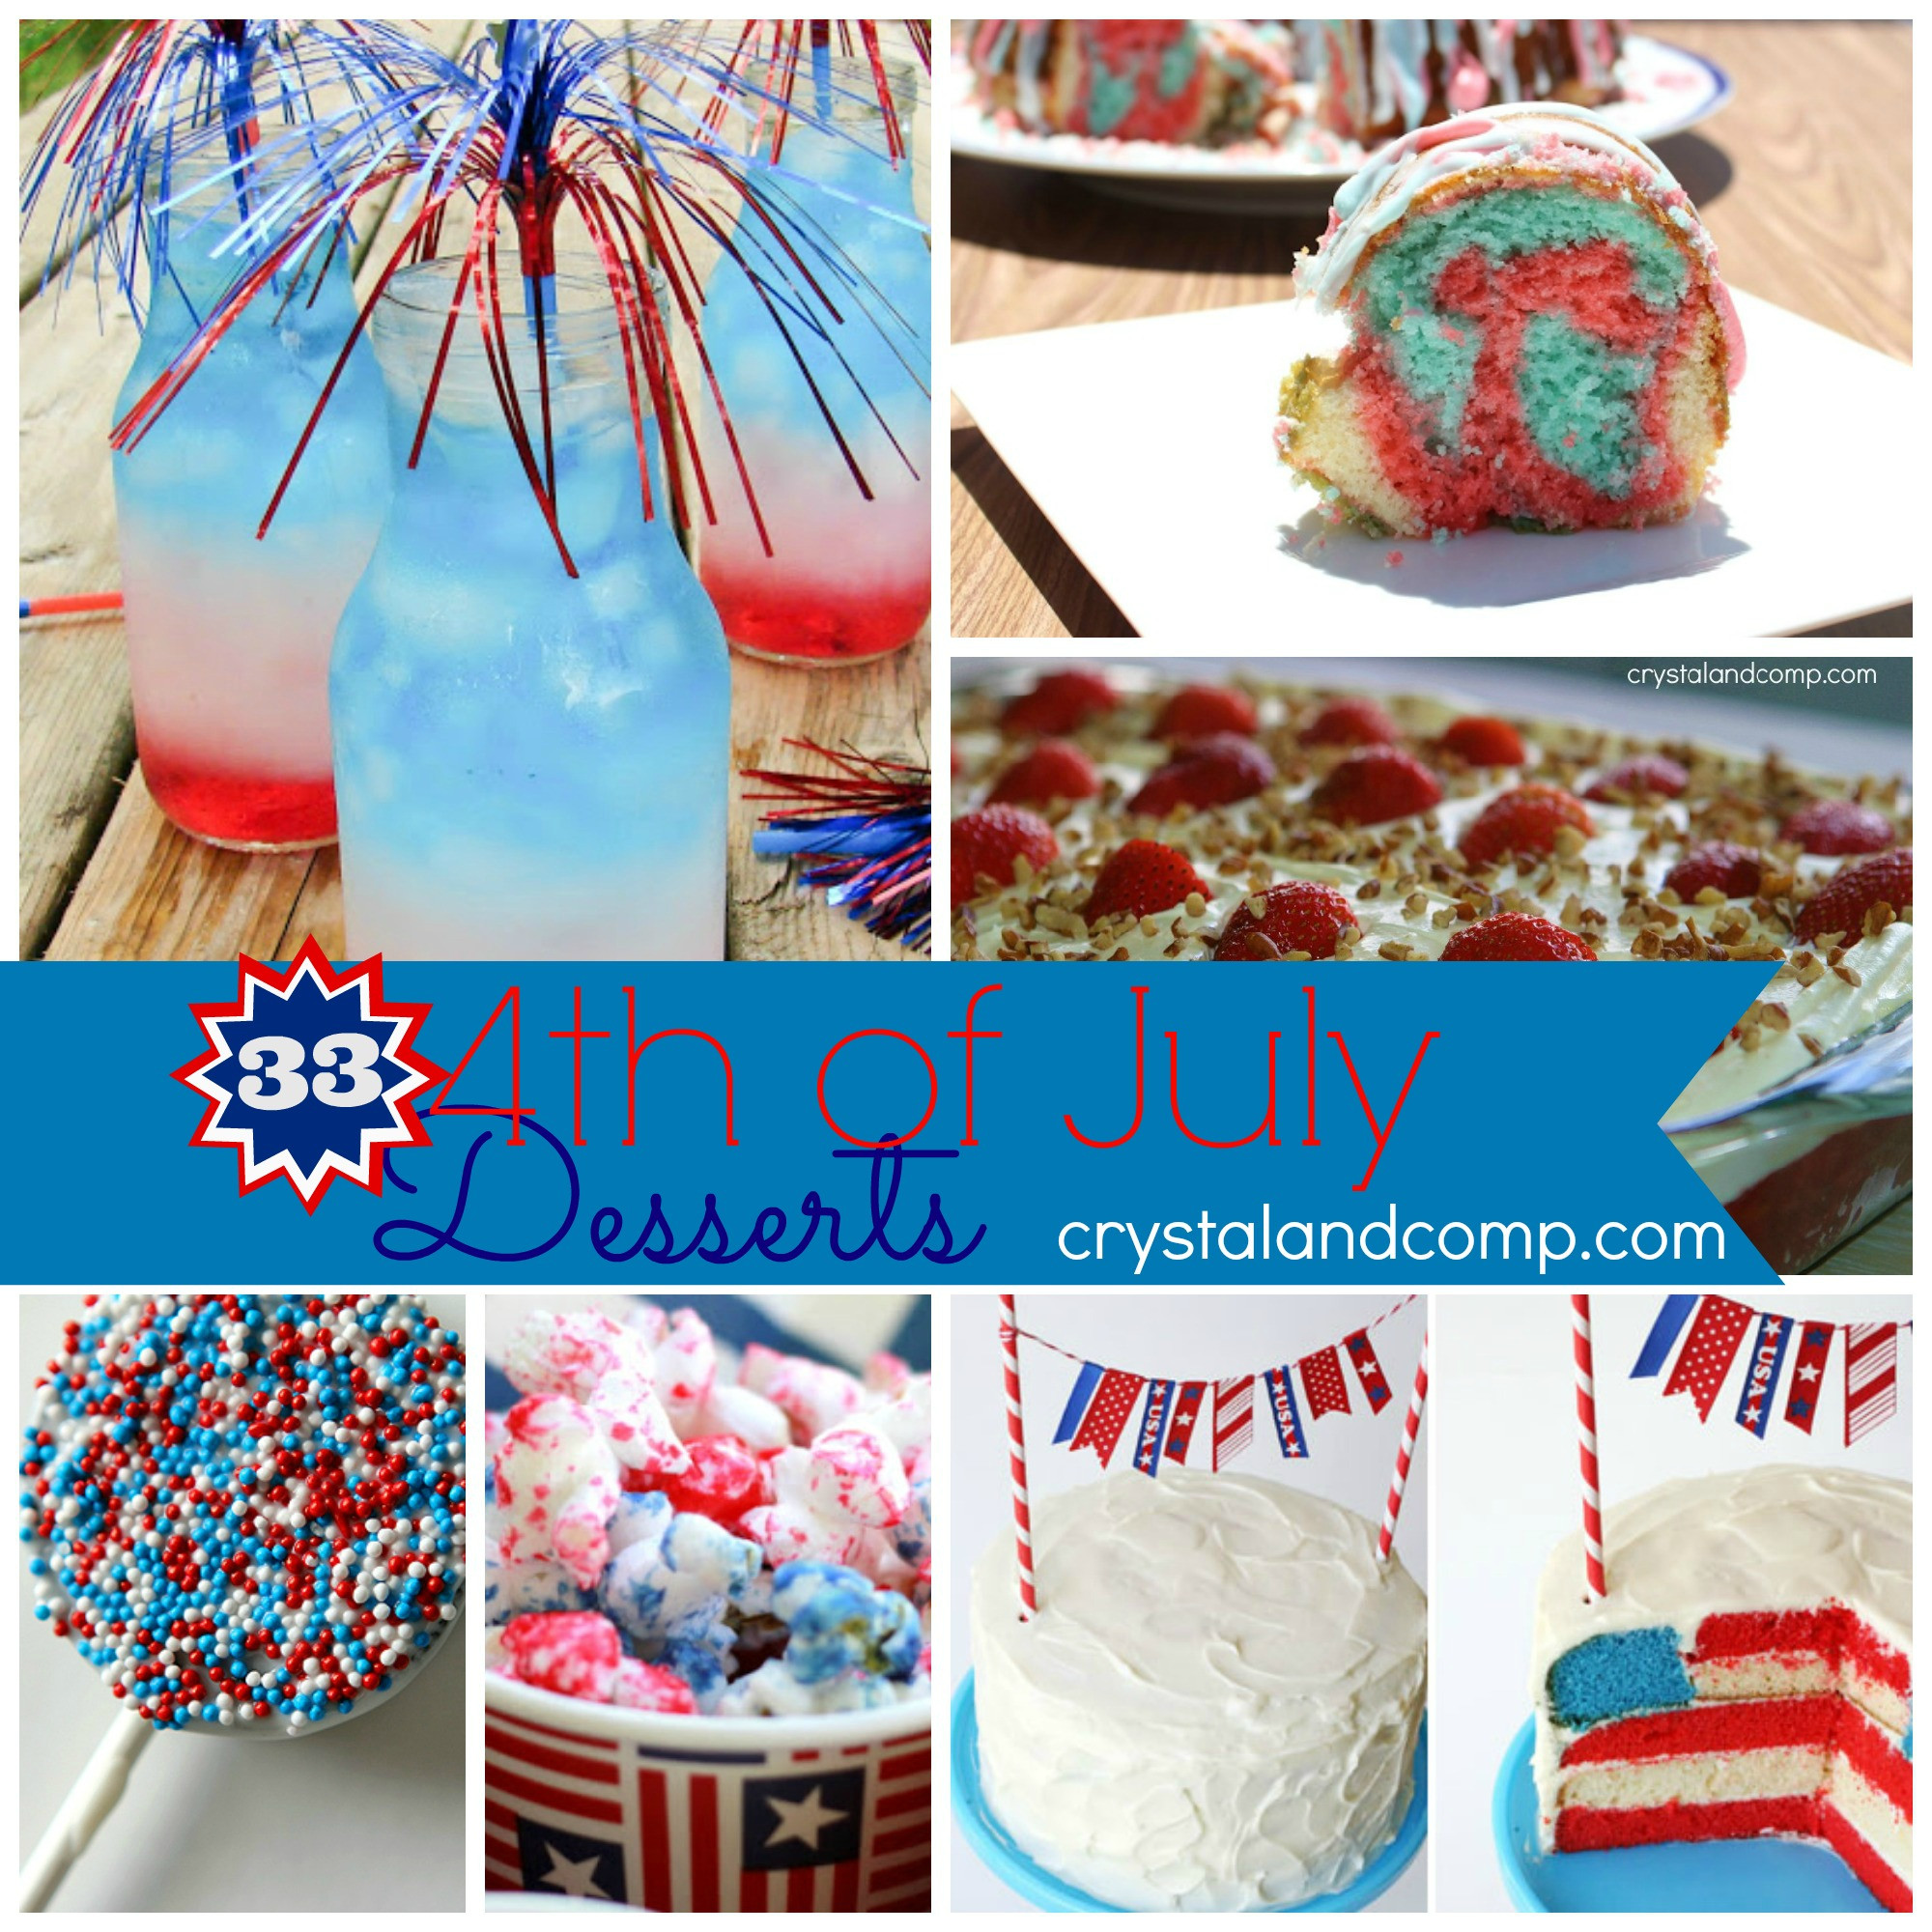 Easy July 4 Desserts
 33 Easy Dessert Recipes for 4th of July